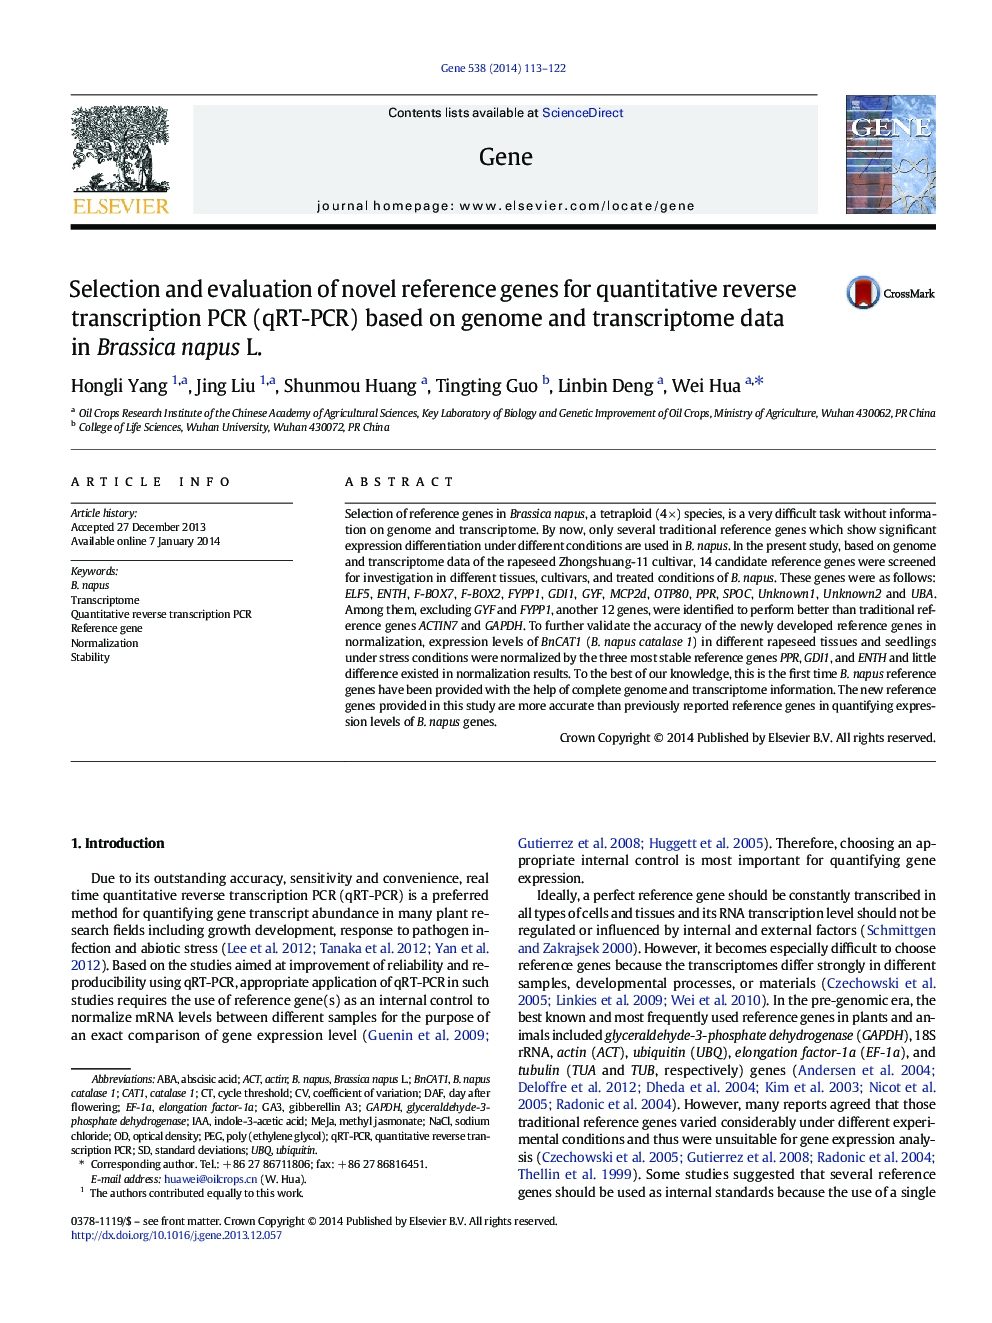 Selection and evaluation of novel reference genes for quantitative reverse transcription PCR (qRT-PCR) based on genome and transcriptome data in Brassica napus L.